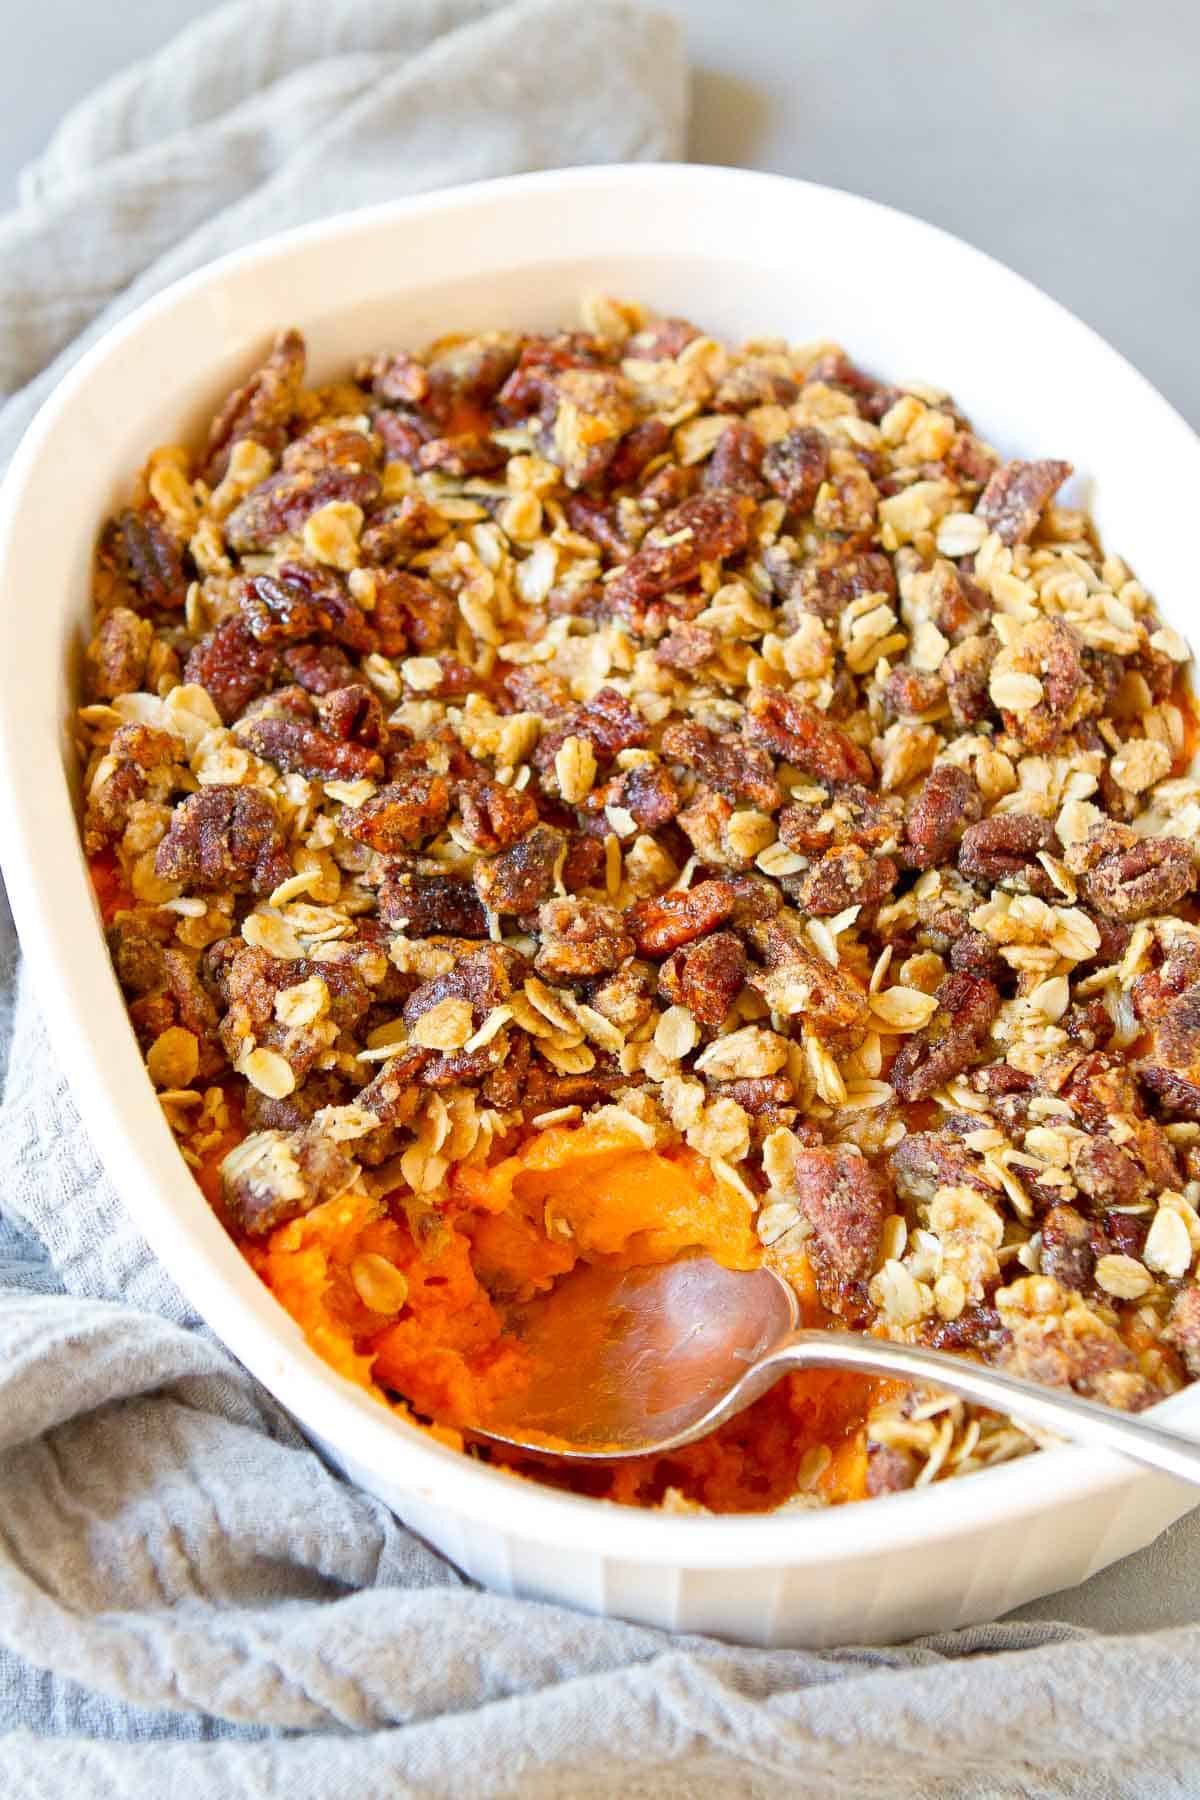 Sweet potato casserole with pecan topping in a white casserole dish, with a silver spoon. Gray napkin underneath.